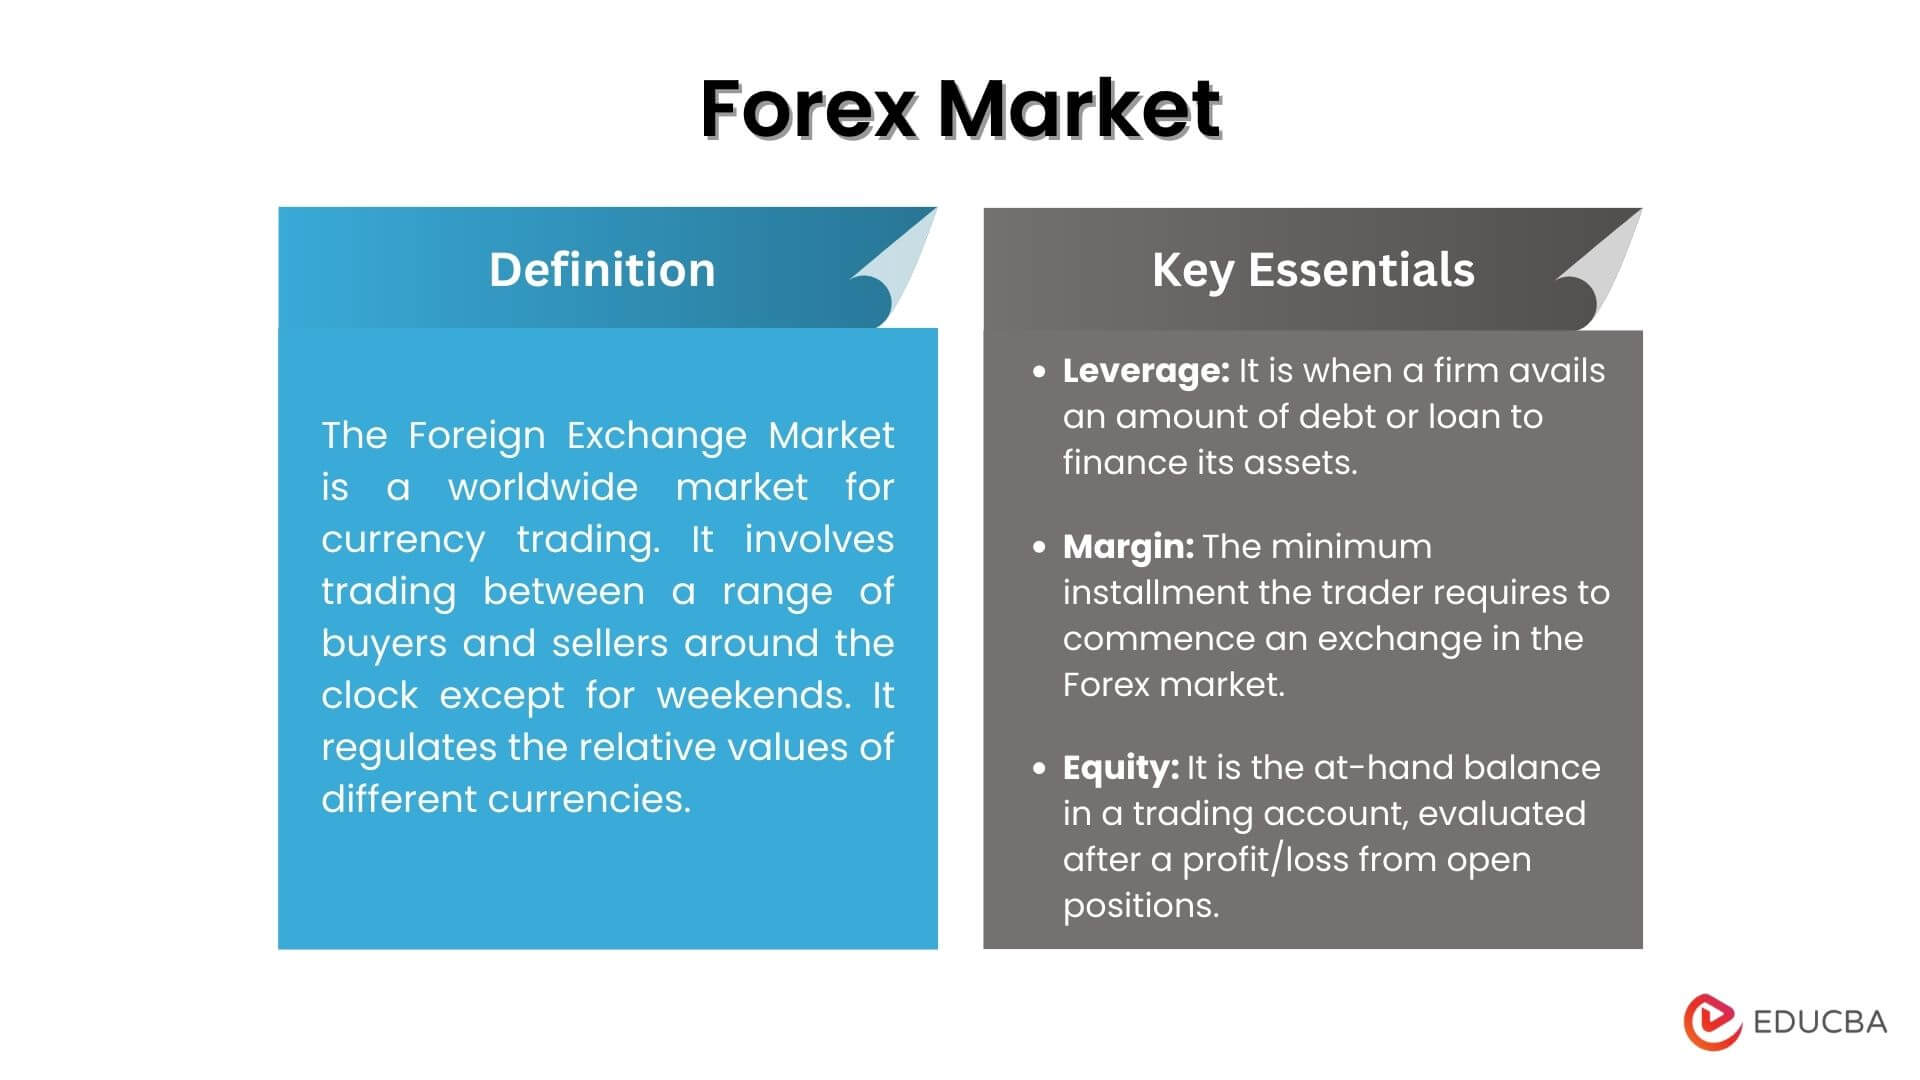 Forex (FX): How Trading in the Foreign Exchange Market Works